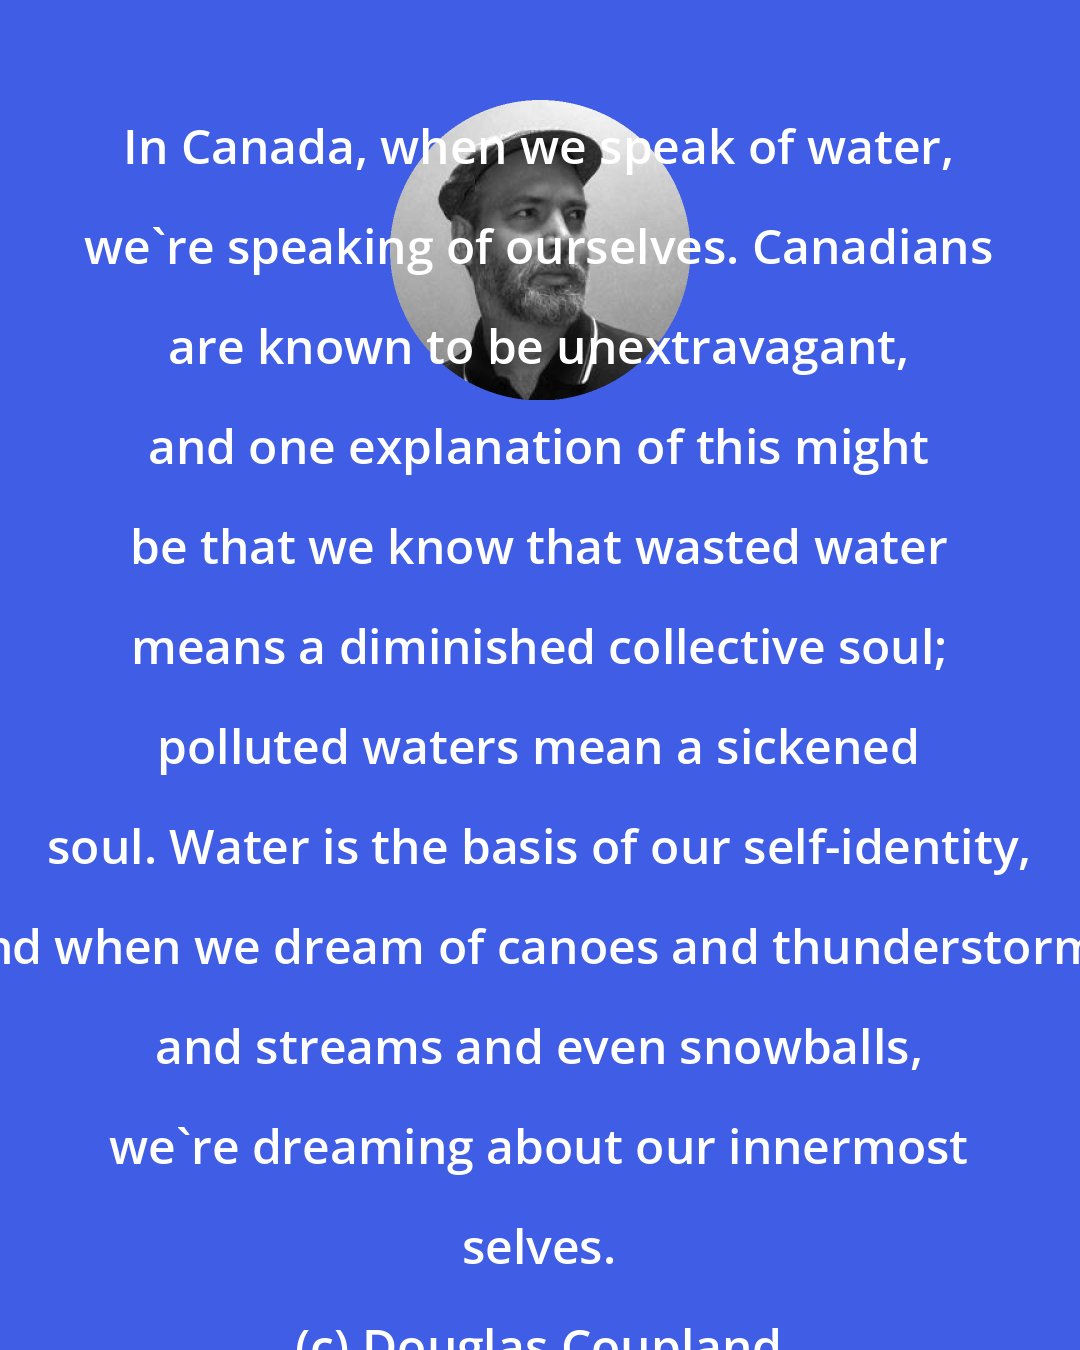 Douglas Coupland: In Canada, when we speak of water, we're speaking of ourselves. Canadians are known to be unextravagant, and one explanation of this might be that we know that wasted water means a diminished collective soul; polluted waters mean a sickened soul. Water is the basis of our self-identity, and when we dream of canoes and thunderstorms and streams and even snowballs, we're dreaming about our innermost selves.